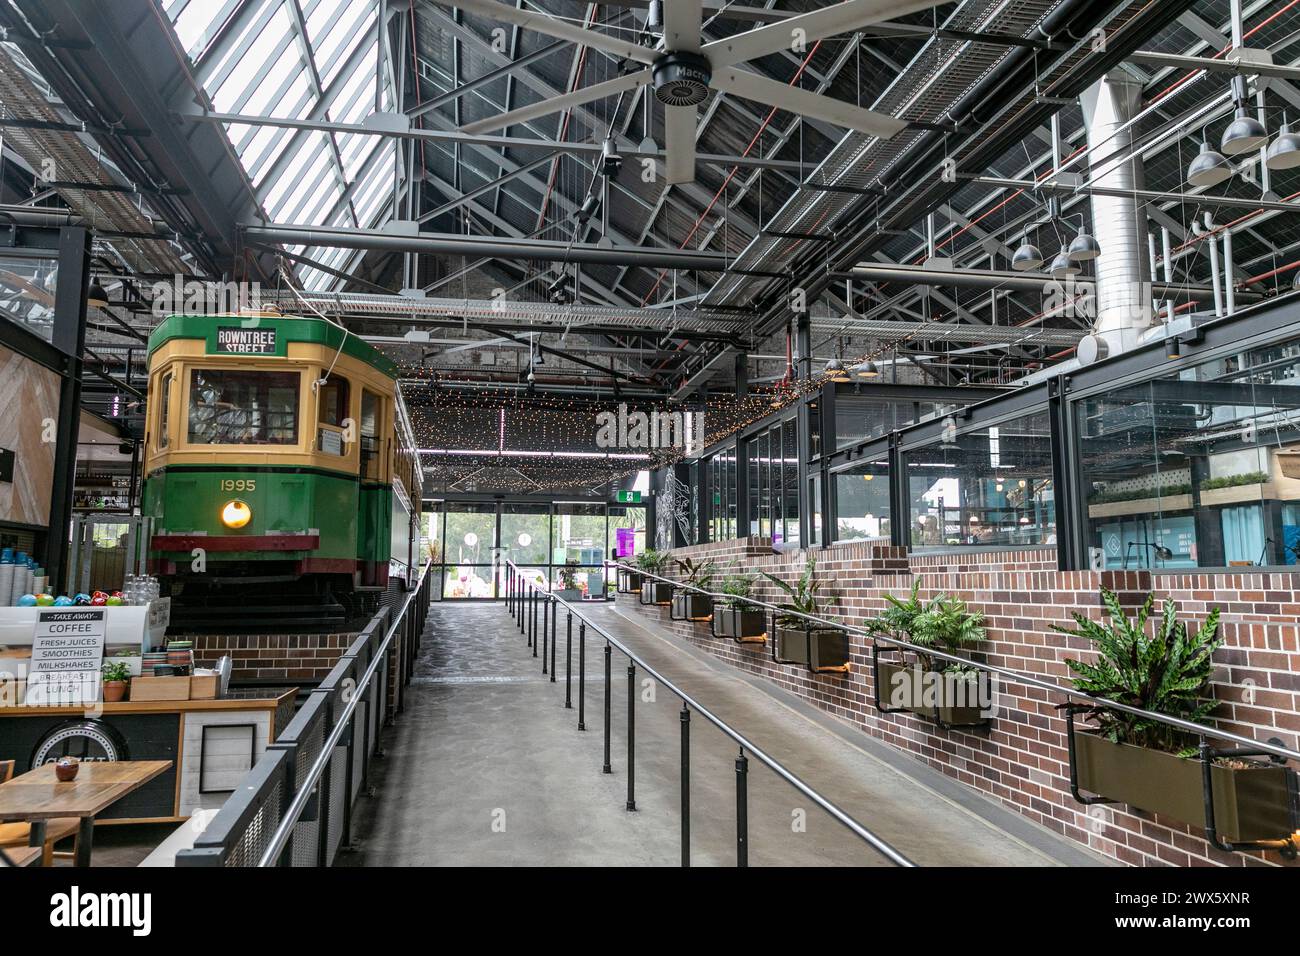 Sydney tram sheds food and cafe precinct in Forest lodge near Glebe, conversion of the former Rozelle tram depot now retail precinct, and tram R1 Stock Photo